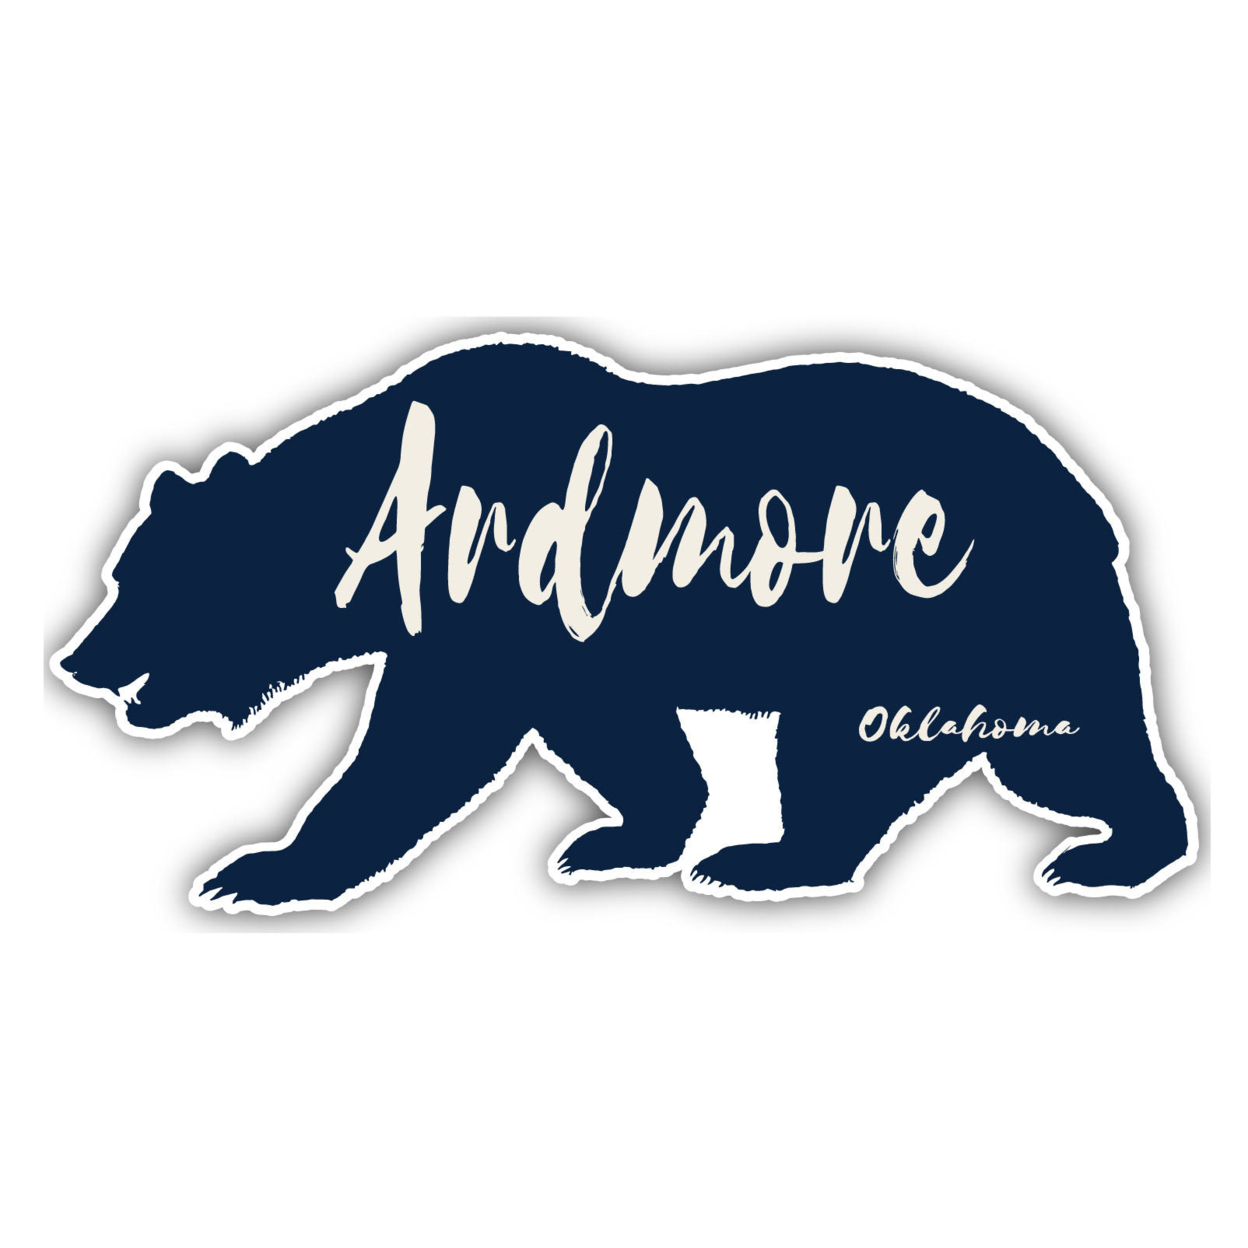 Ardmore Oklahoma Souvenir Decorative Stickers (Choose Theme And Size) - 4-Pack, 6-Inch, Adventures Awaits